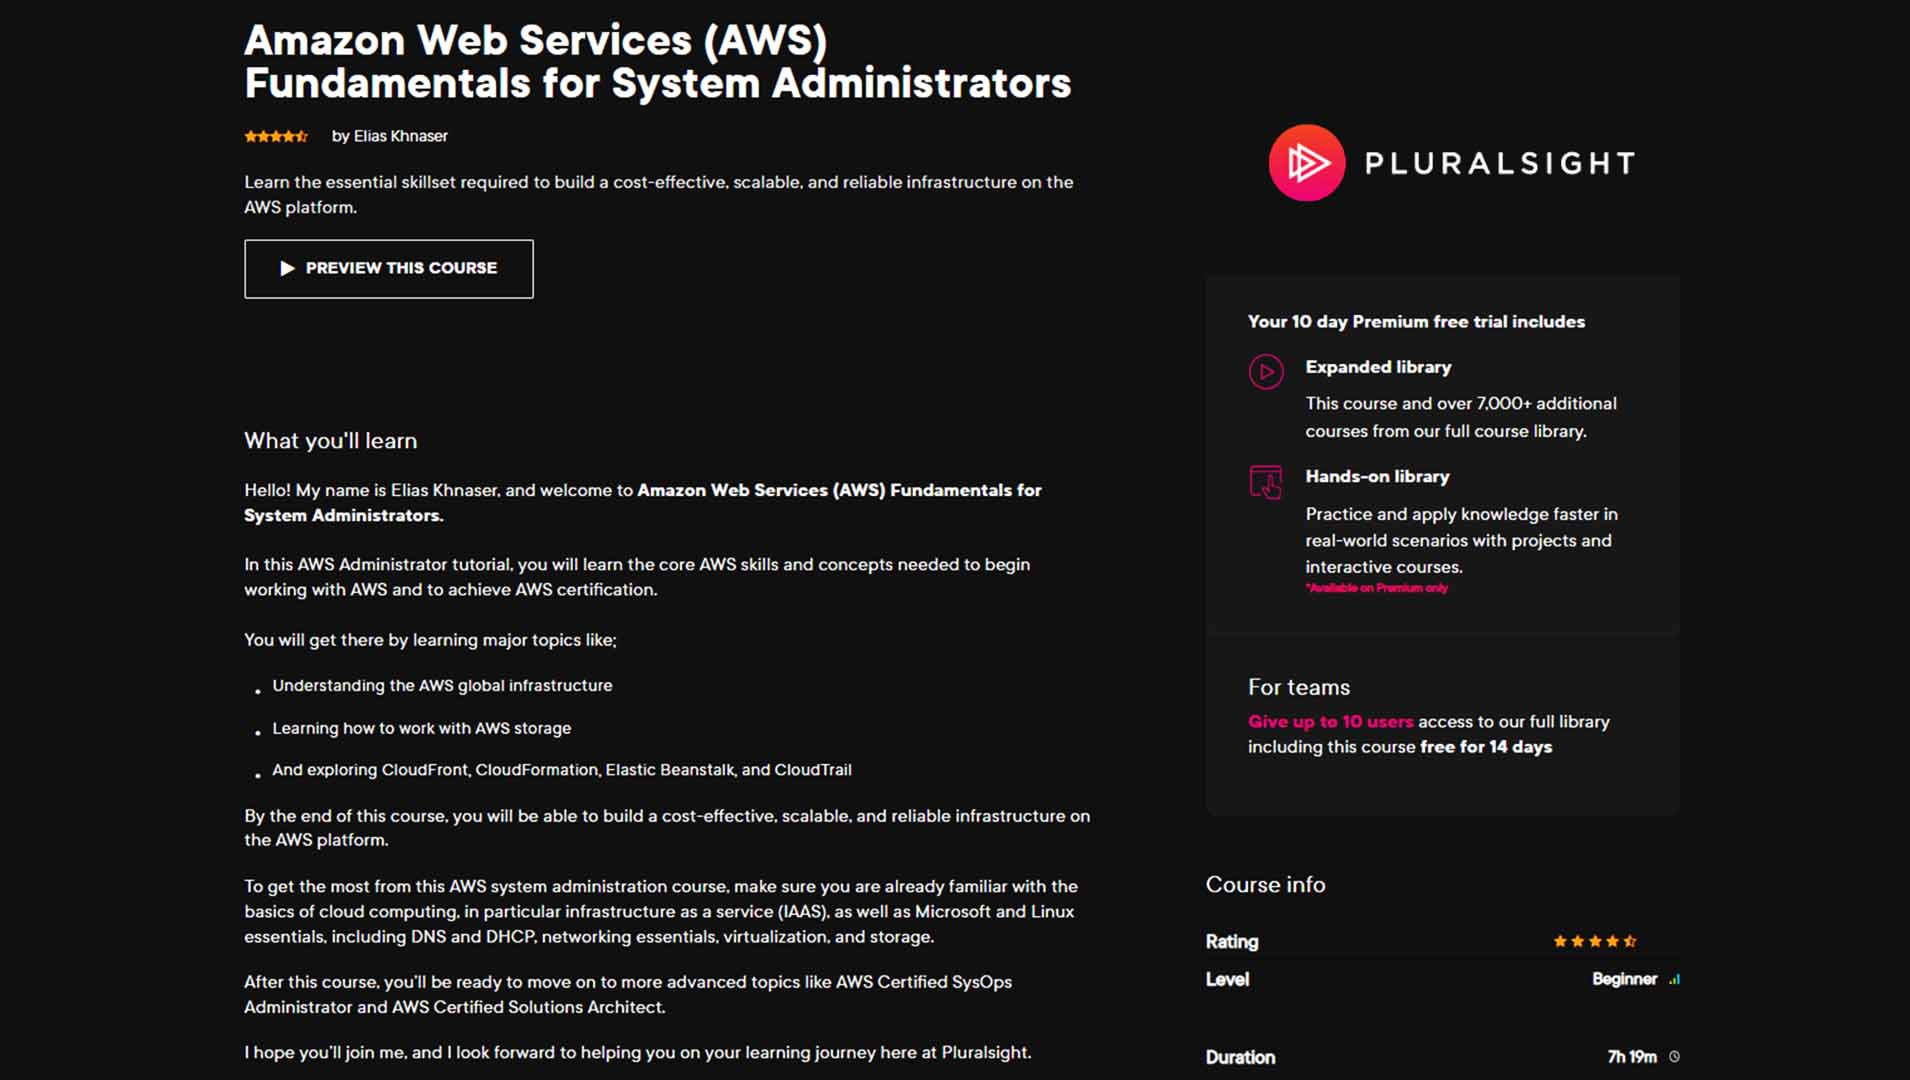 Amazon Web Services (AWS) Fundamentals for System Administrators